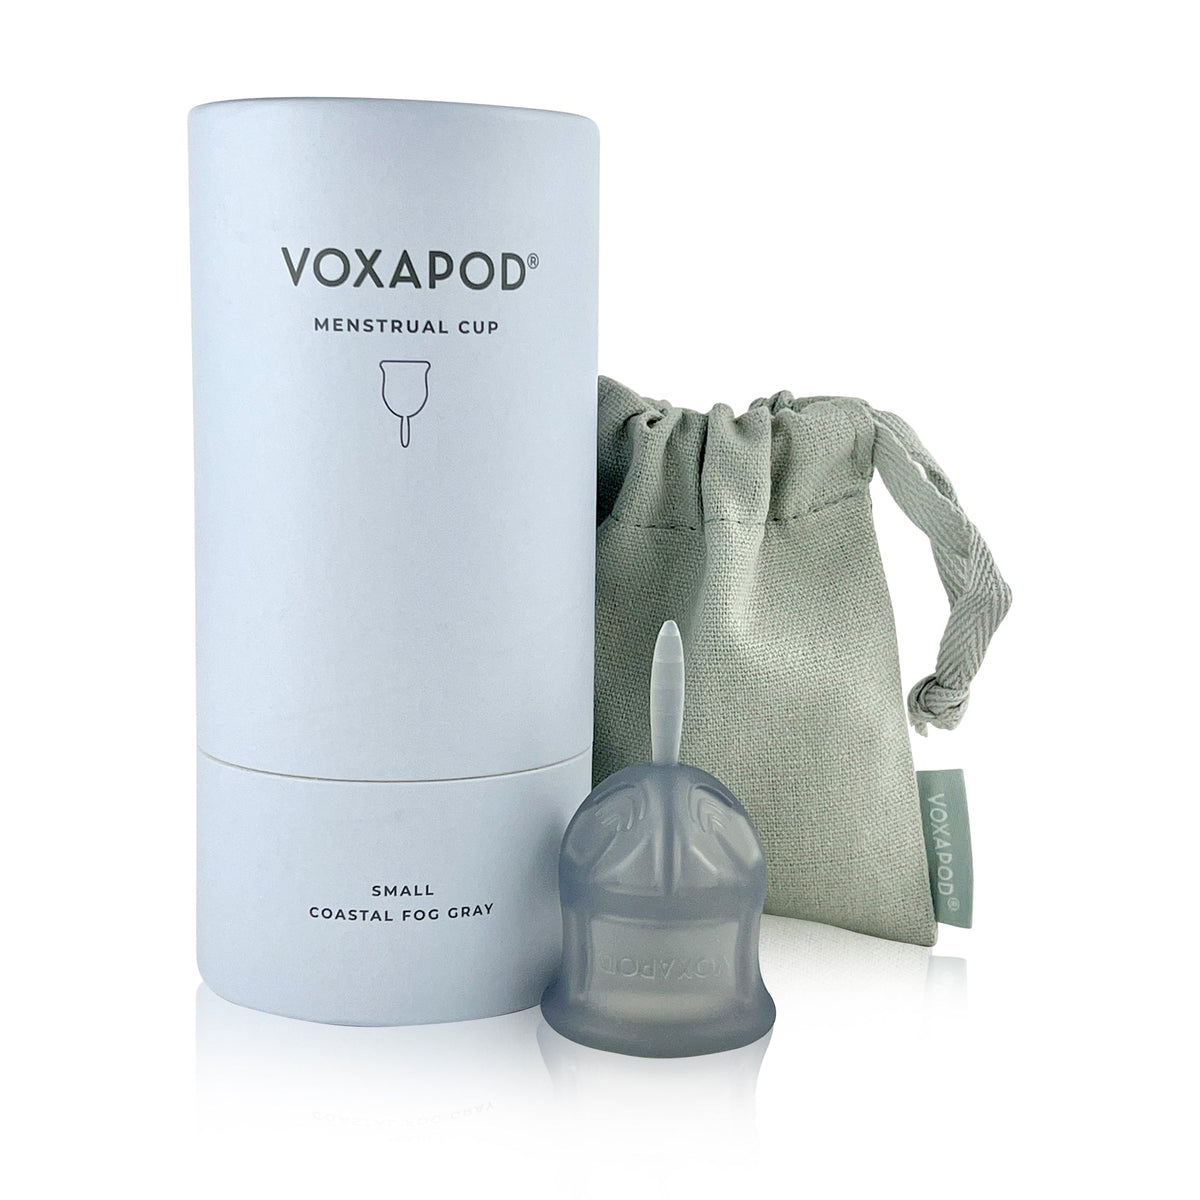 VOXAPOD Menstrual Cup - VOXAPOD® soft reusable medical grade silicone fda approved period cup